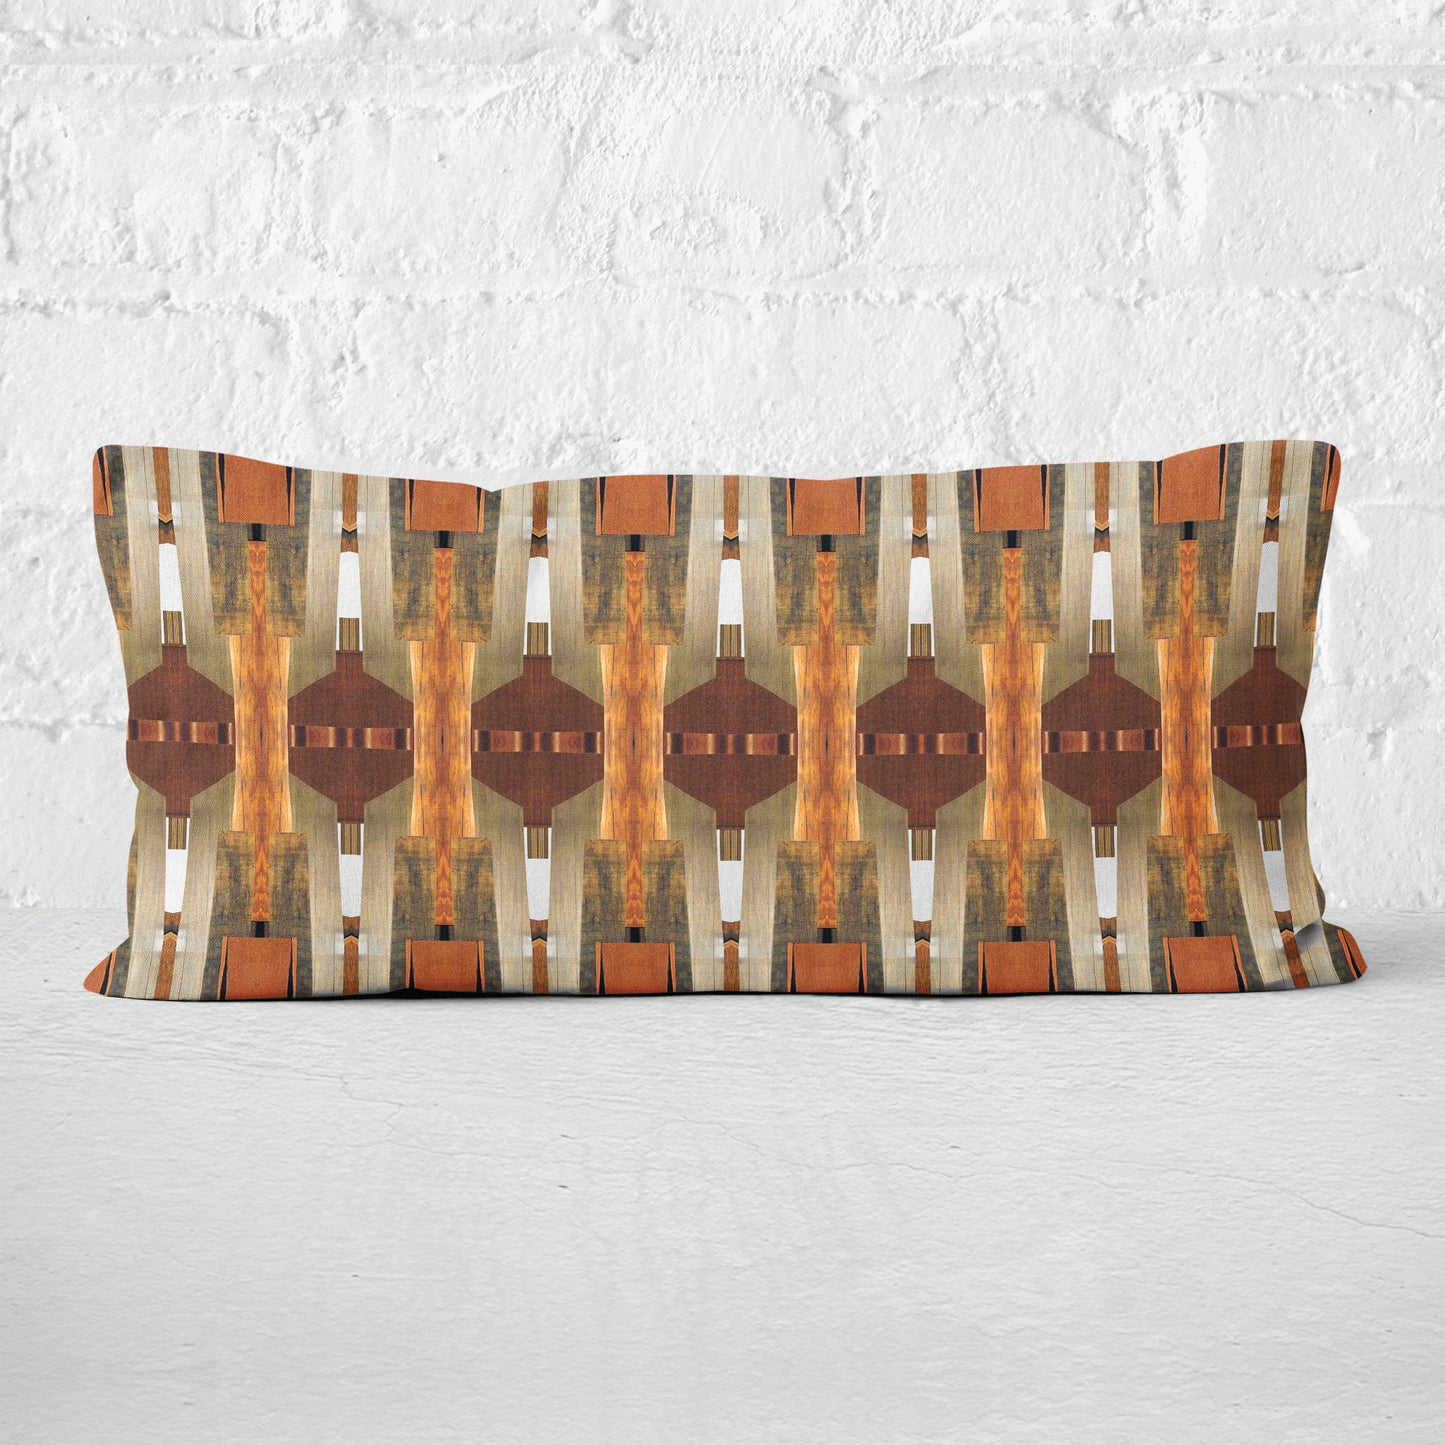 12 x 24 pillow featuring a brown paper collage pattern leaning against a white brick wall.